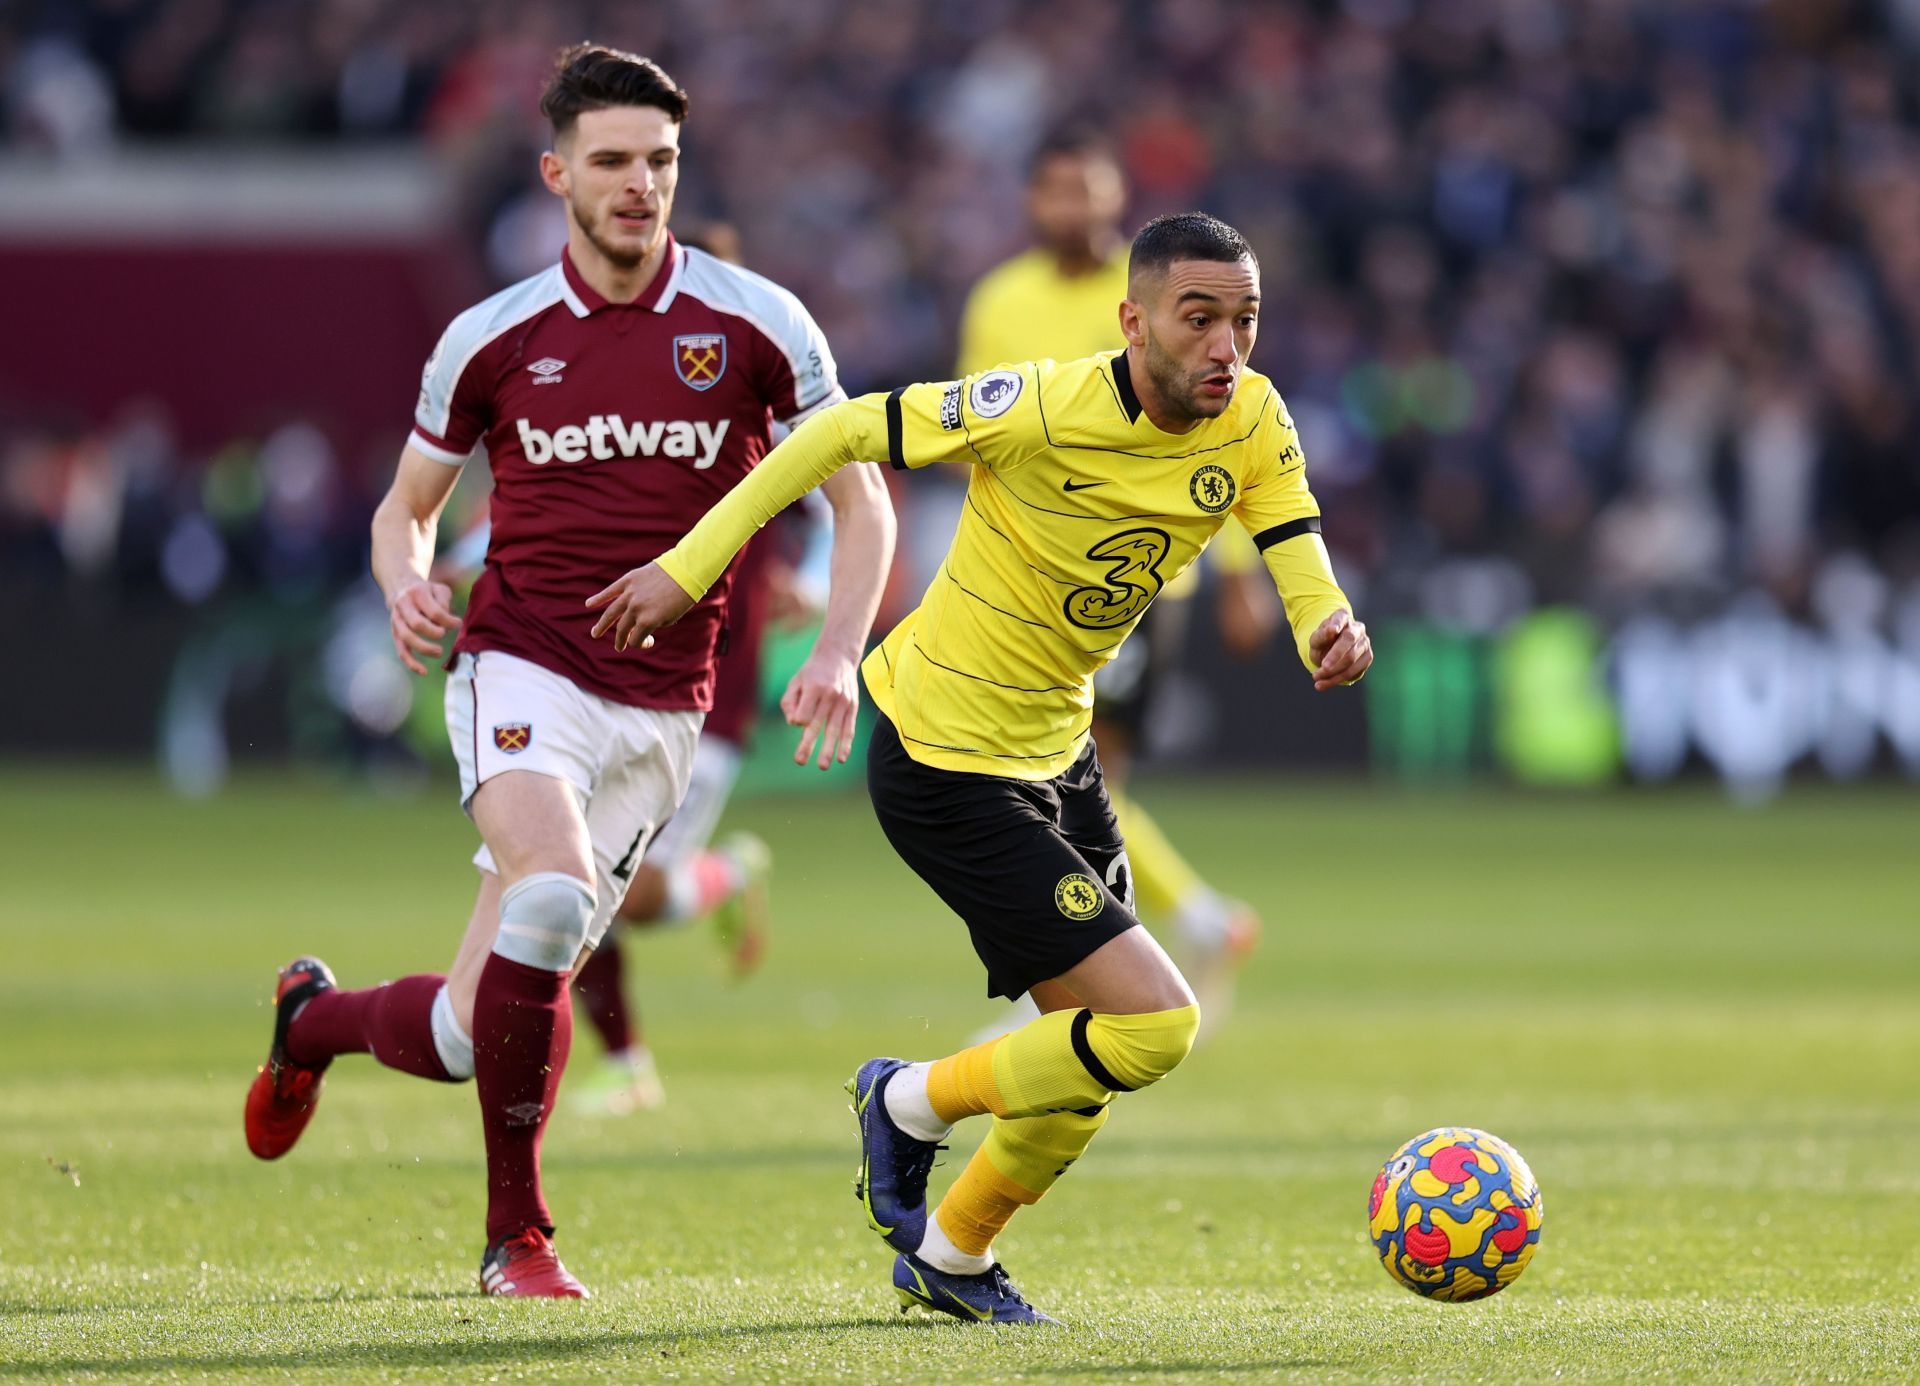 Could Declan Rice (L) return to Chelsea in the summer?